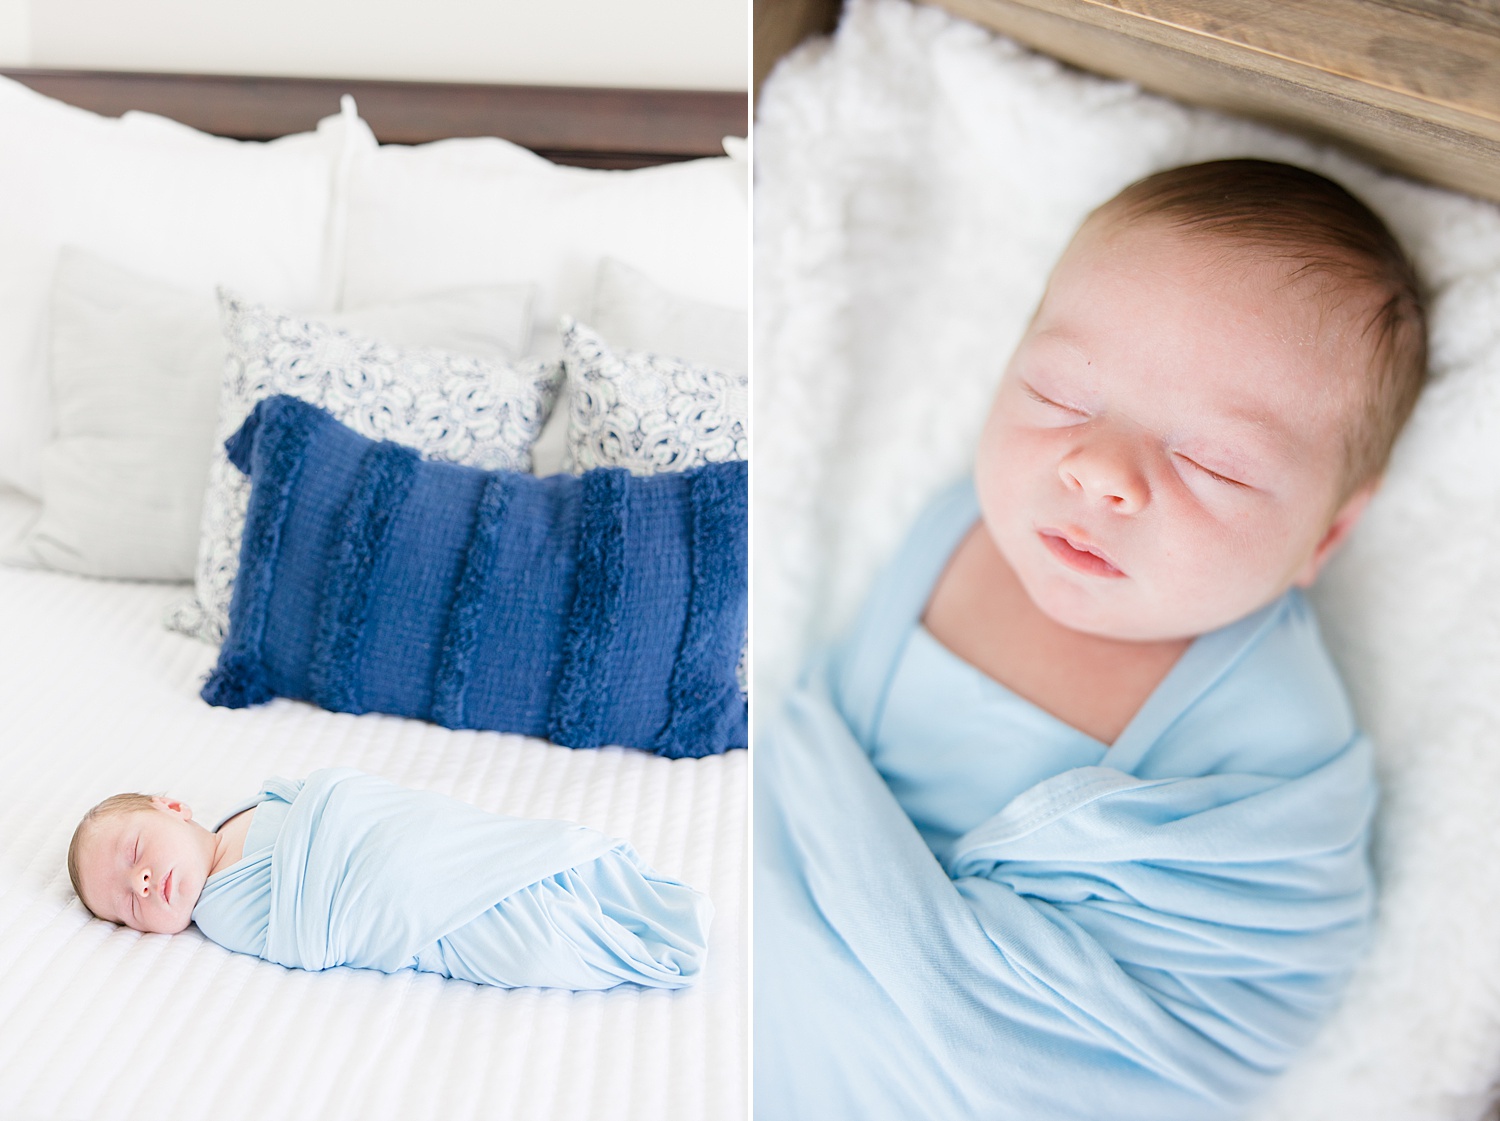 baby sleeps soundly during Birmingham In-Home Newborn + Family Session